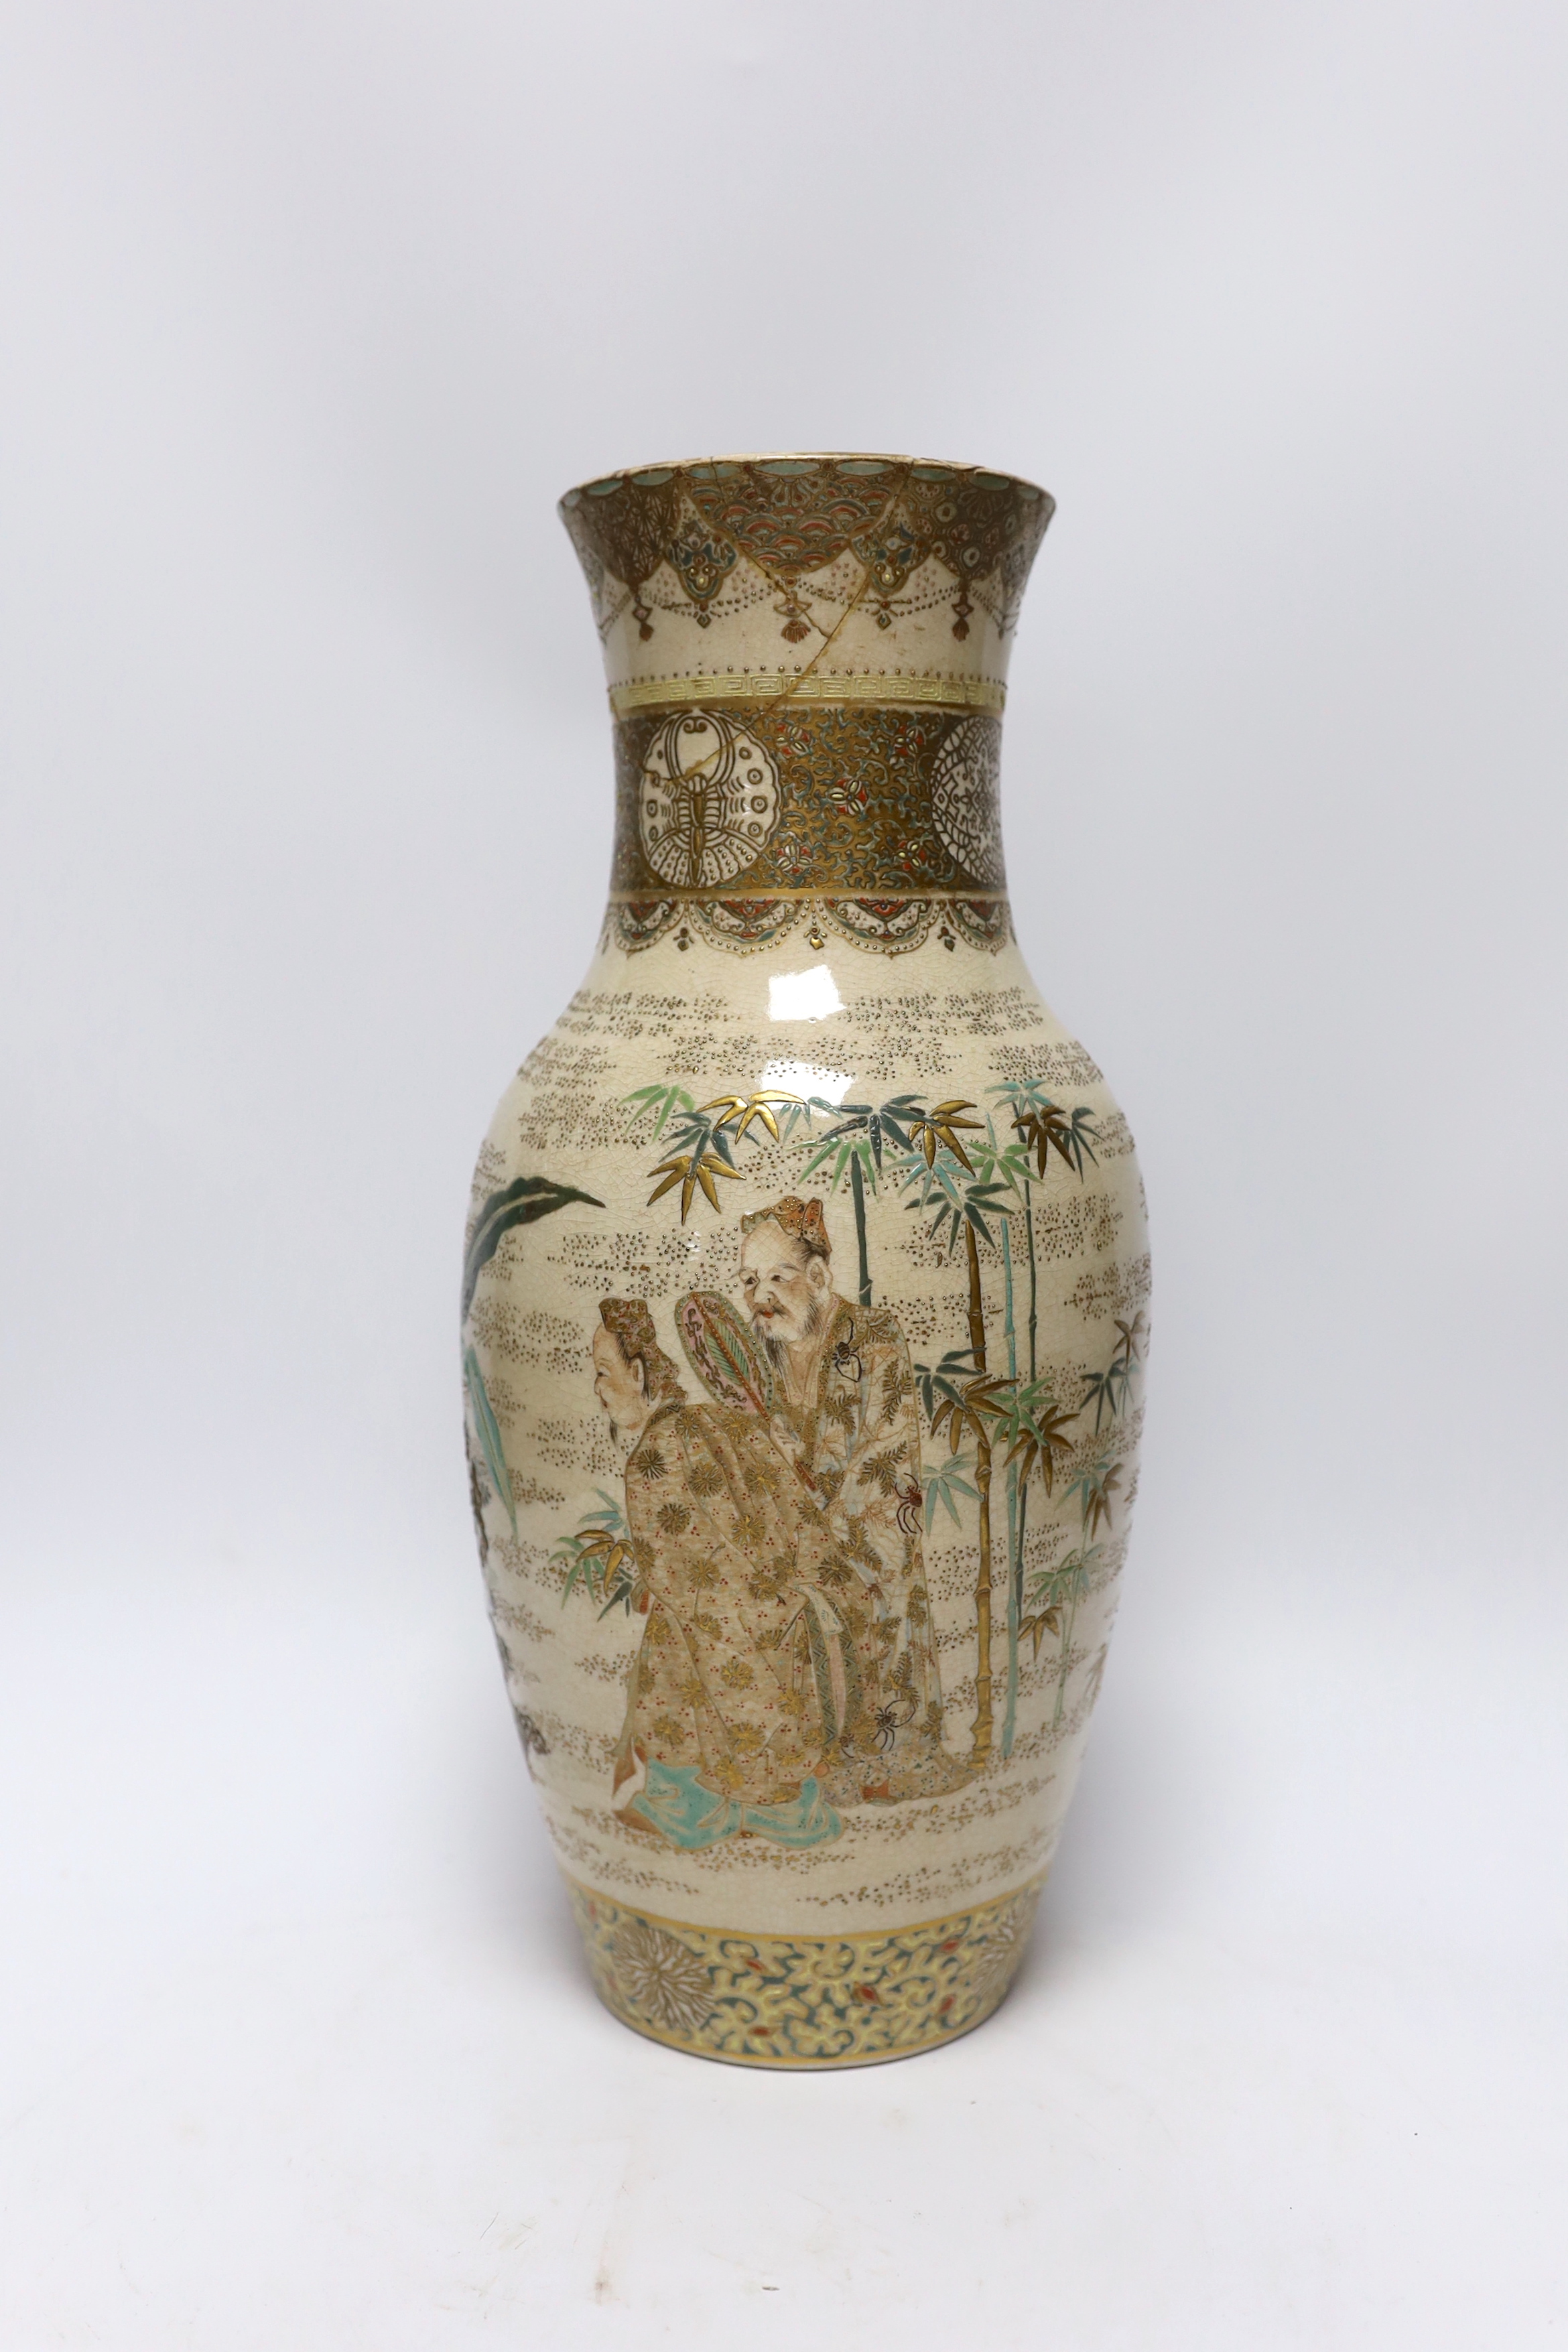 A 19th century Satsuma vase, two ochre pottery vases and a fish designed bowl, (purported to come from Lilly Langtry’s estate), Satsuma vase 36cm high